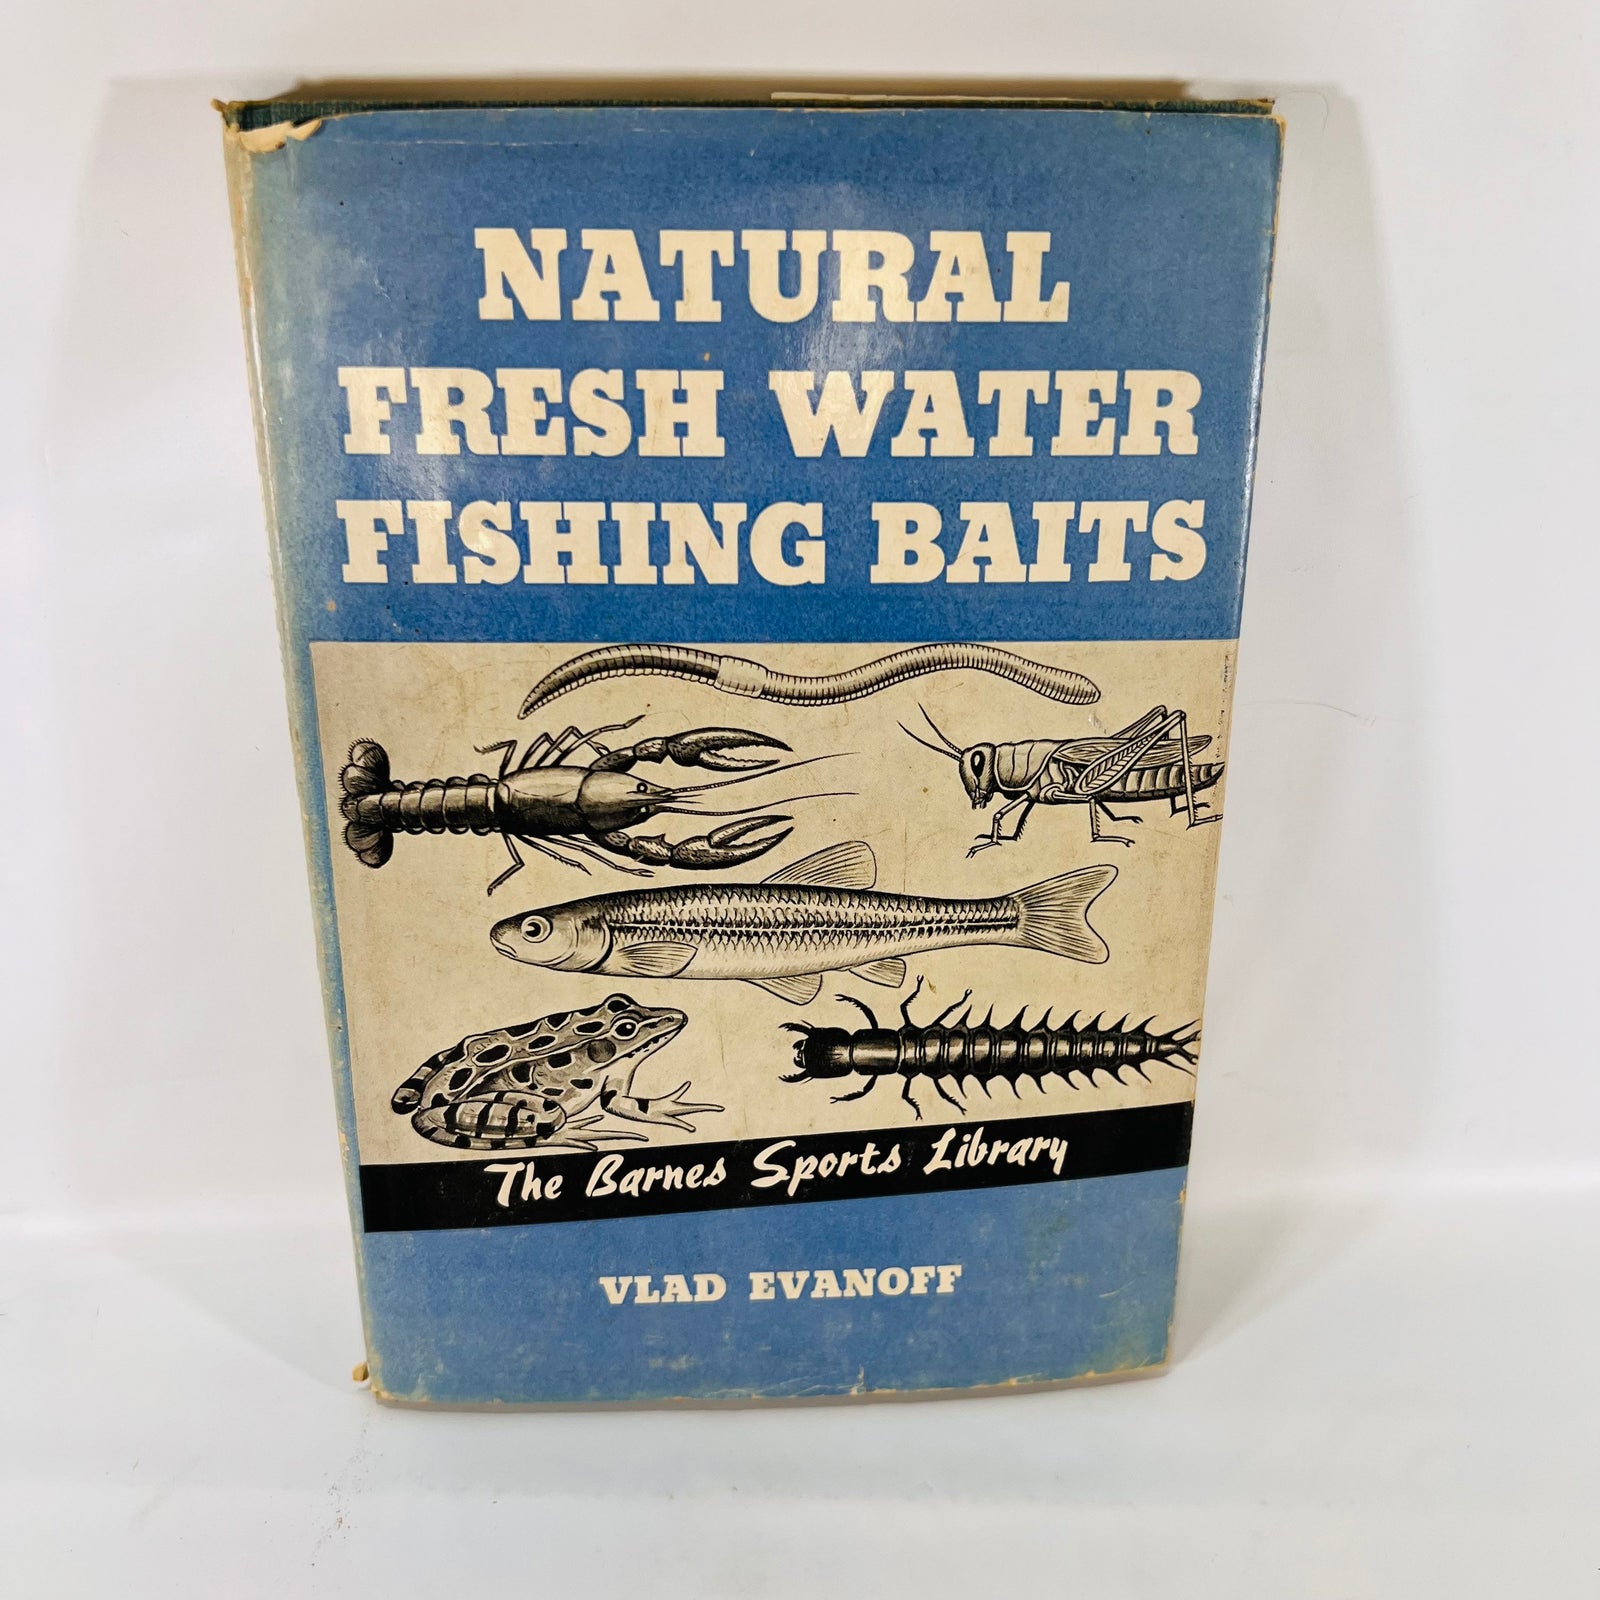 Shop Sports, Fishing, Hunting Books and Collectibles